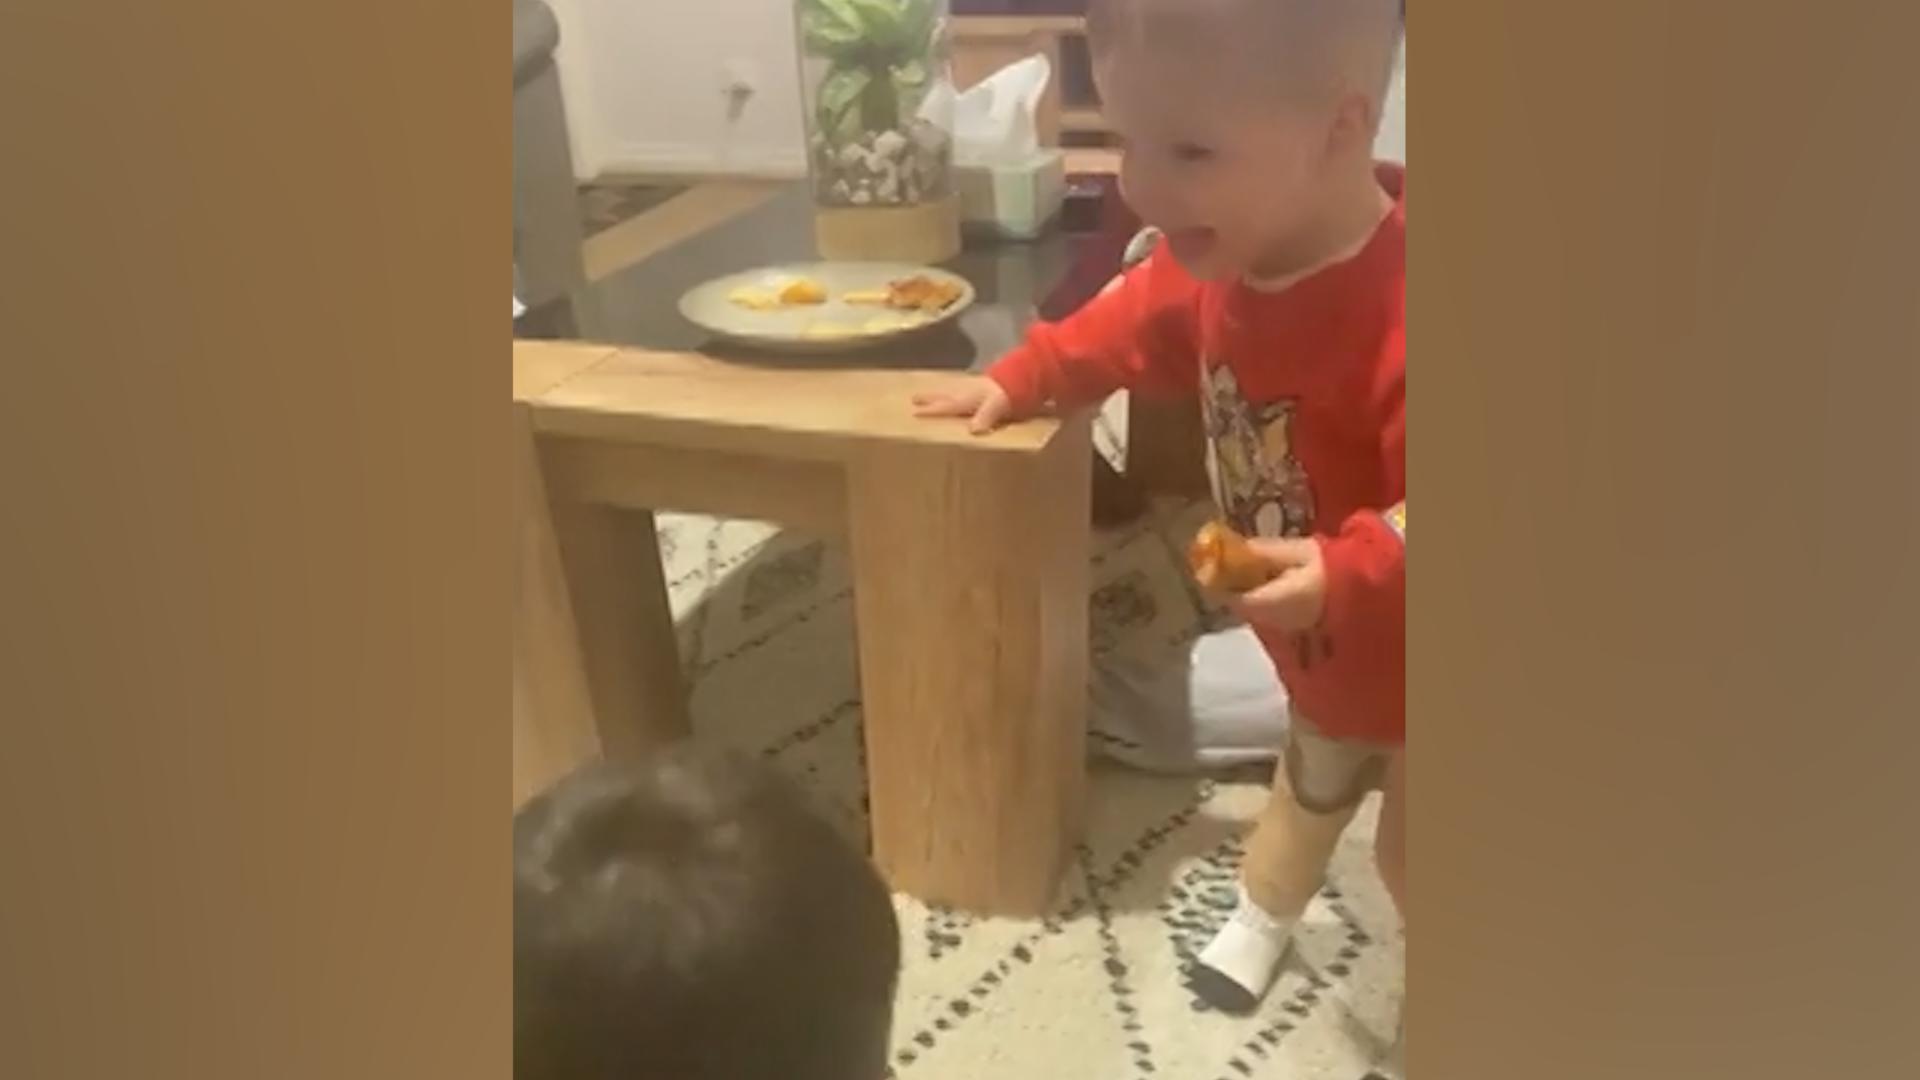 Magical Moment: A toddler trying on a suit for the first time laughs his head off!